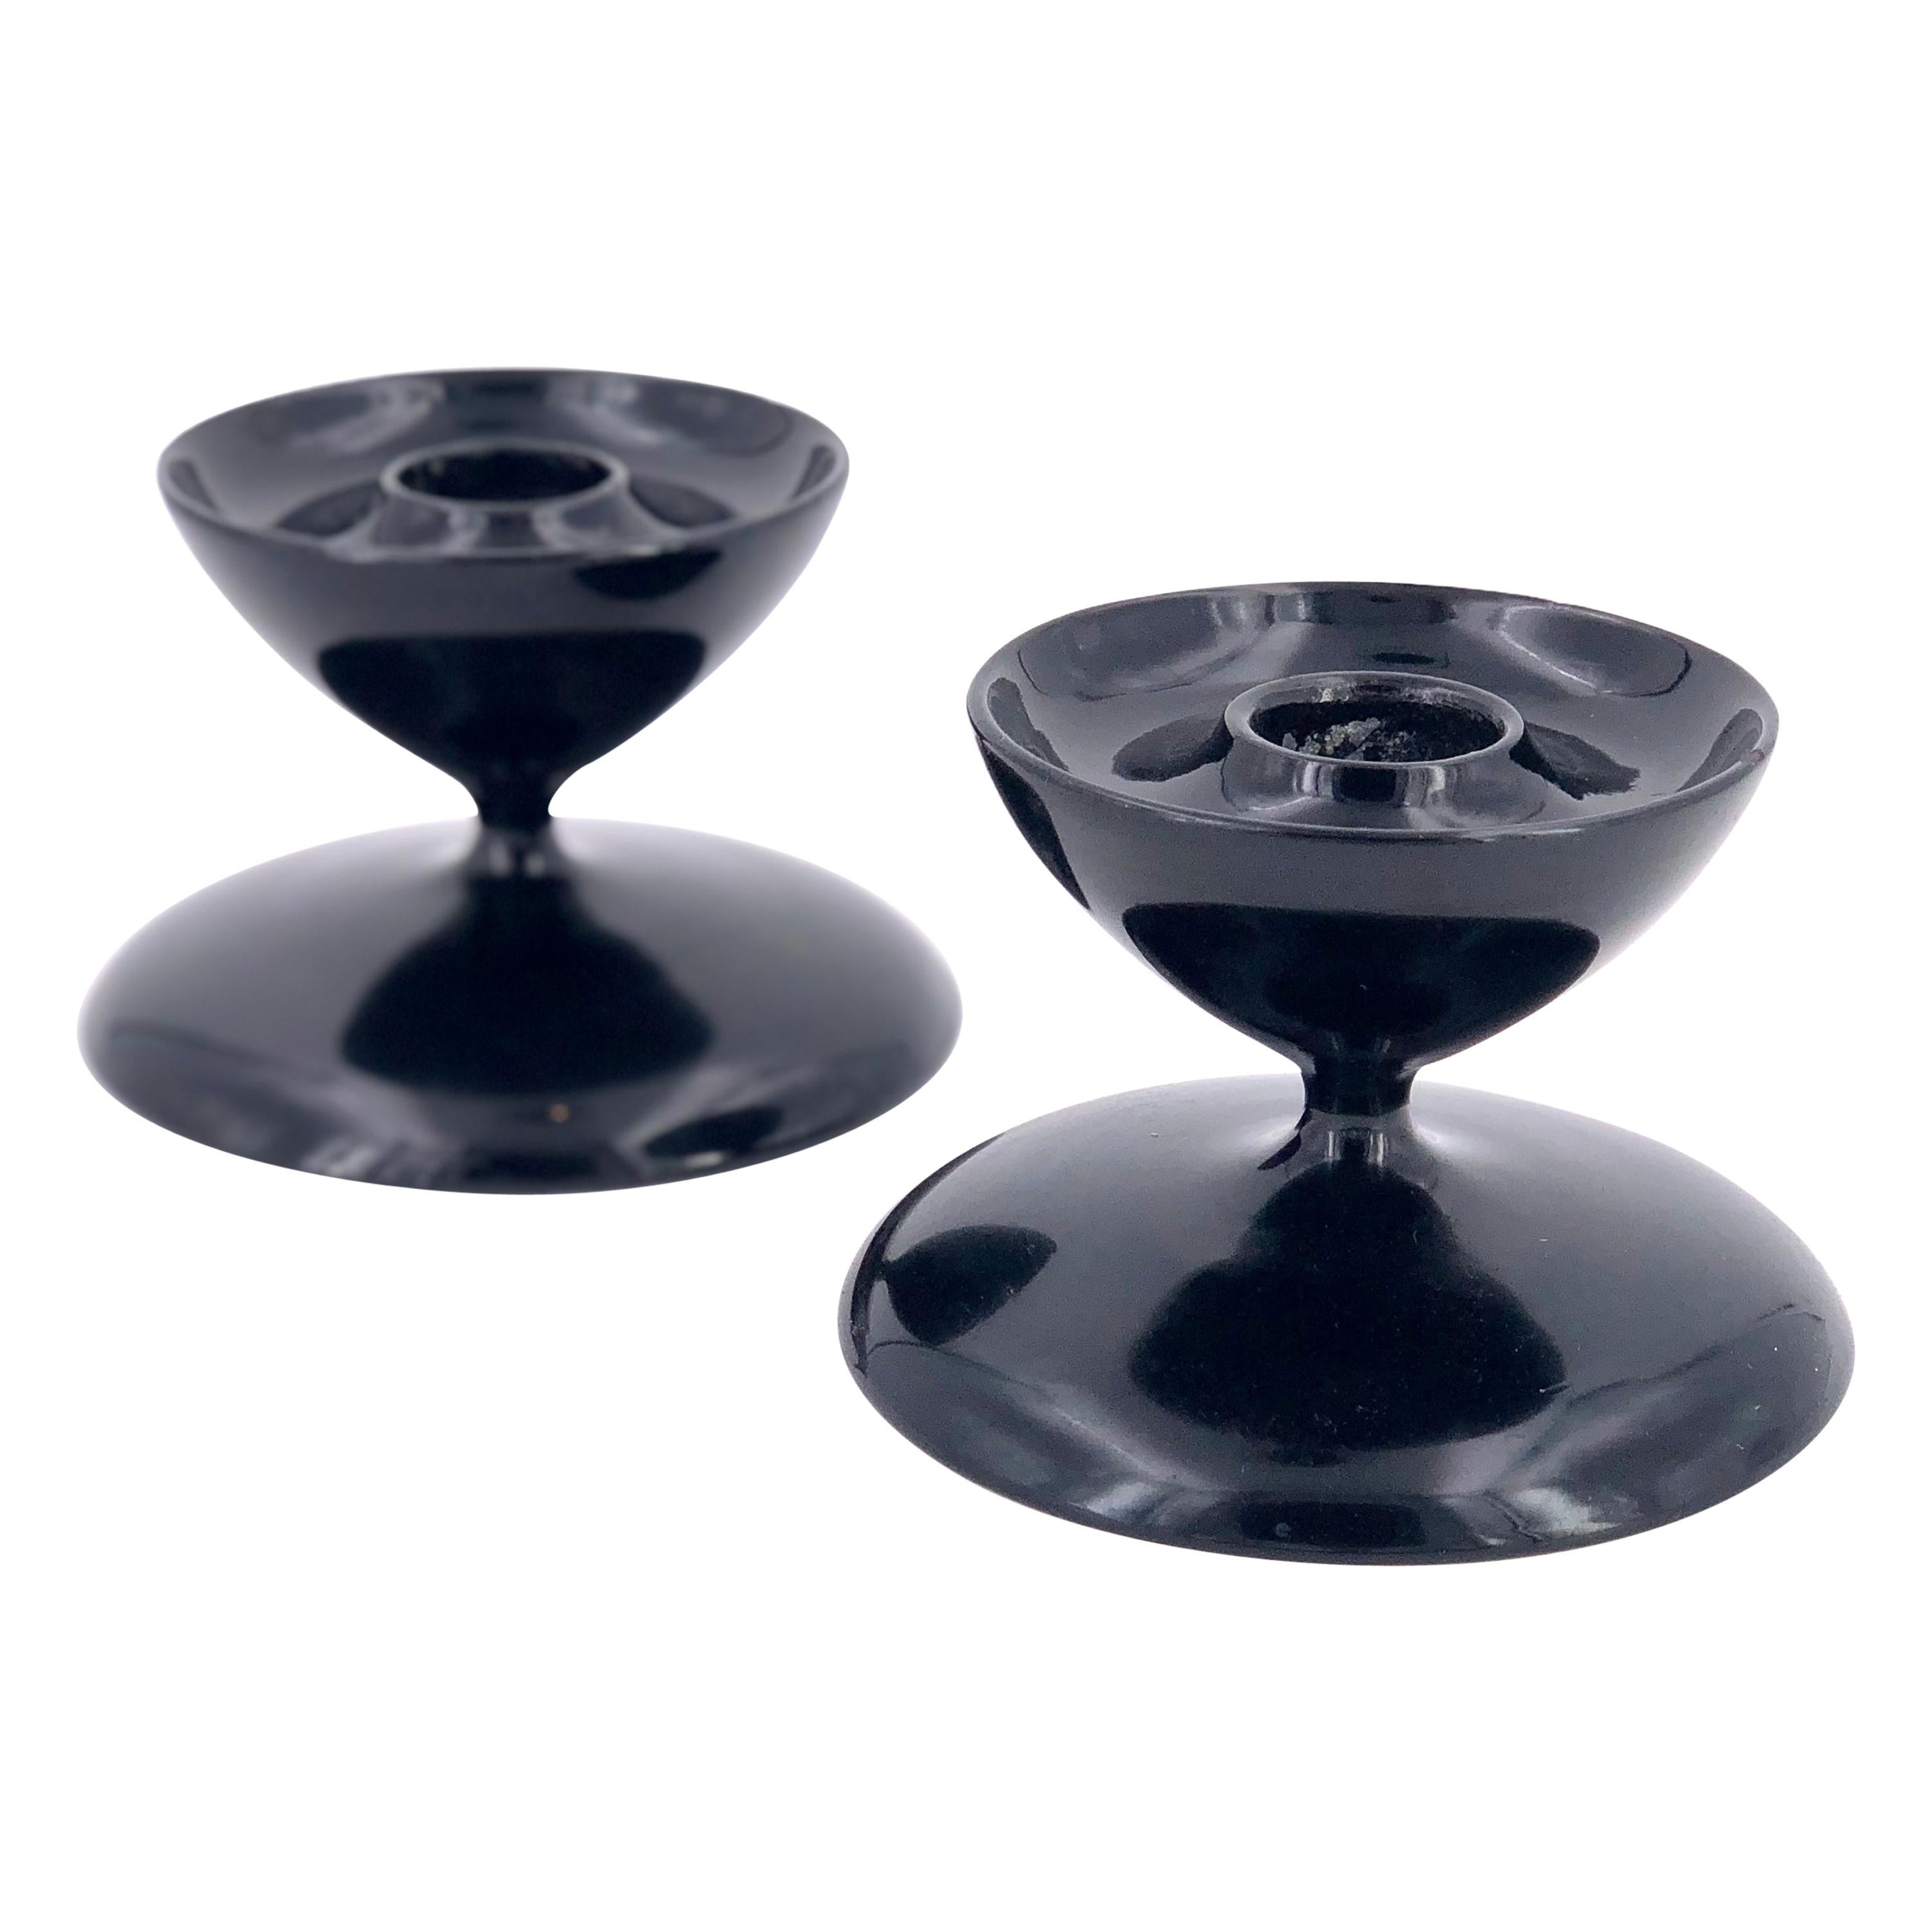 Pair of Modernist Black Lacquer Wood Midcentury Candleholders For Sale